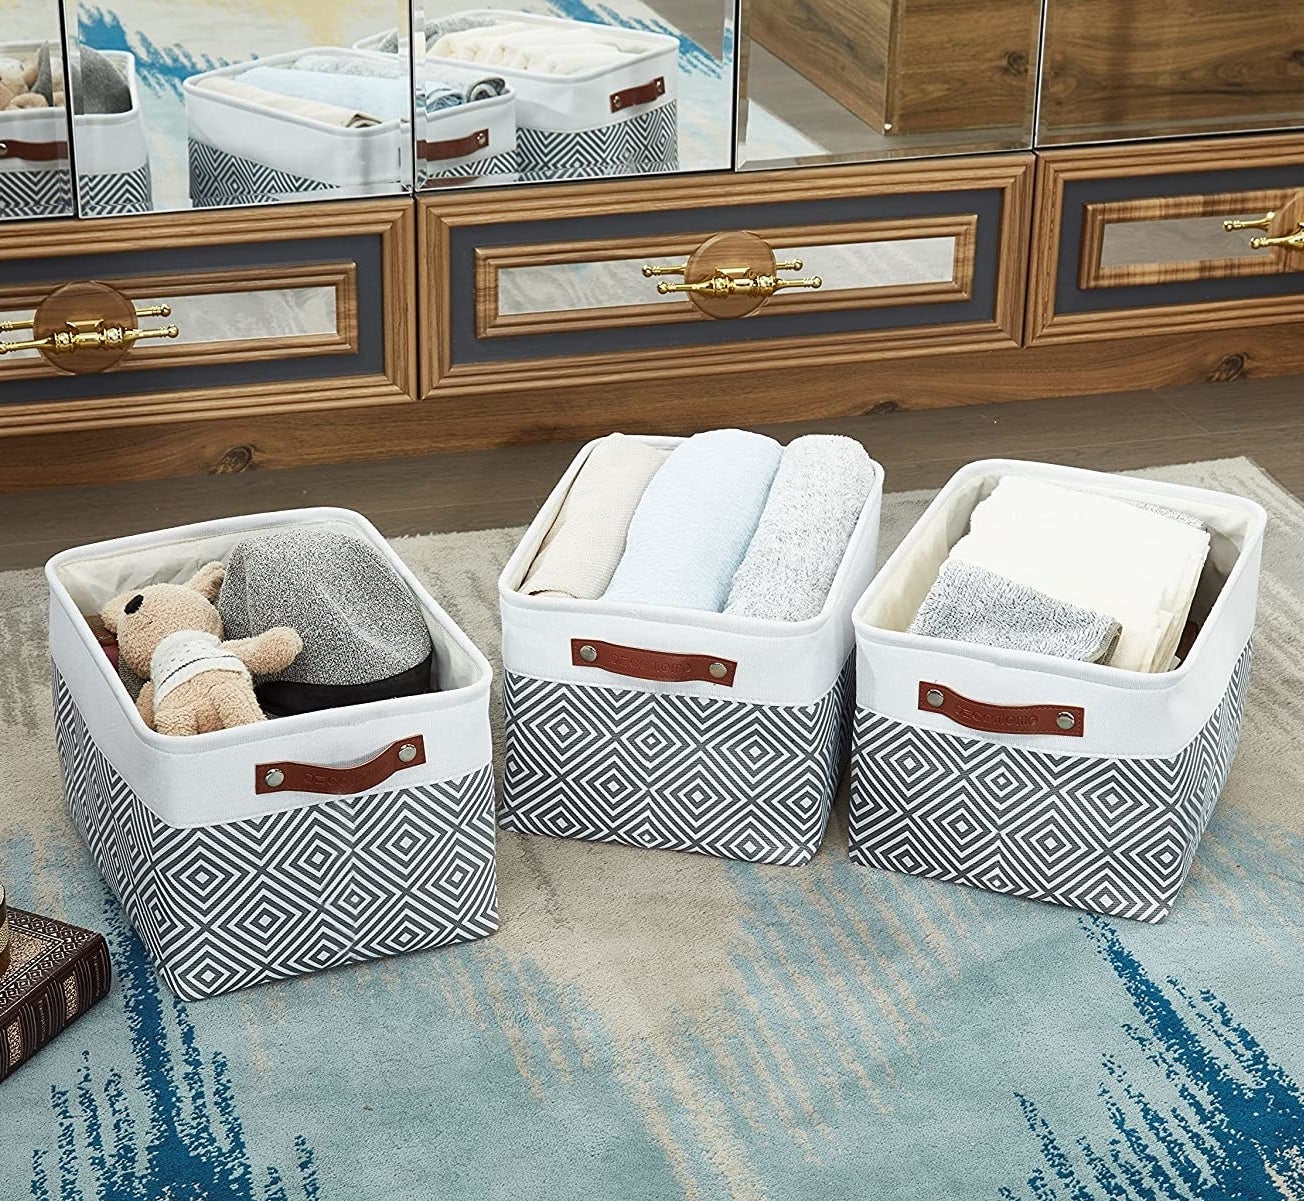 three fabric baskets on a floor filled with blankets, towels, and toys